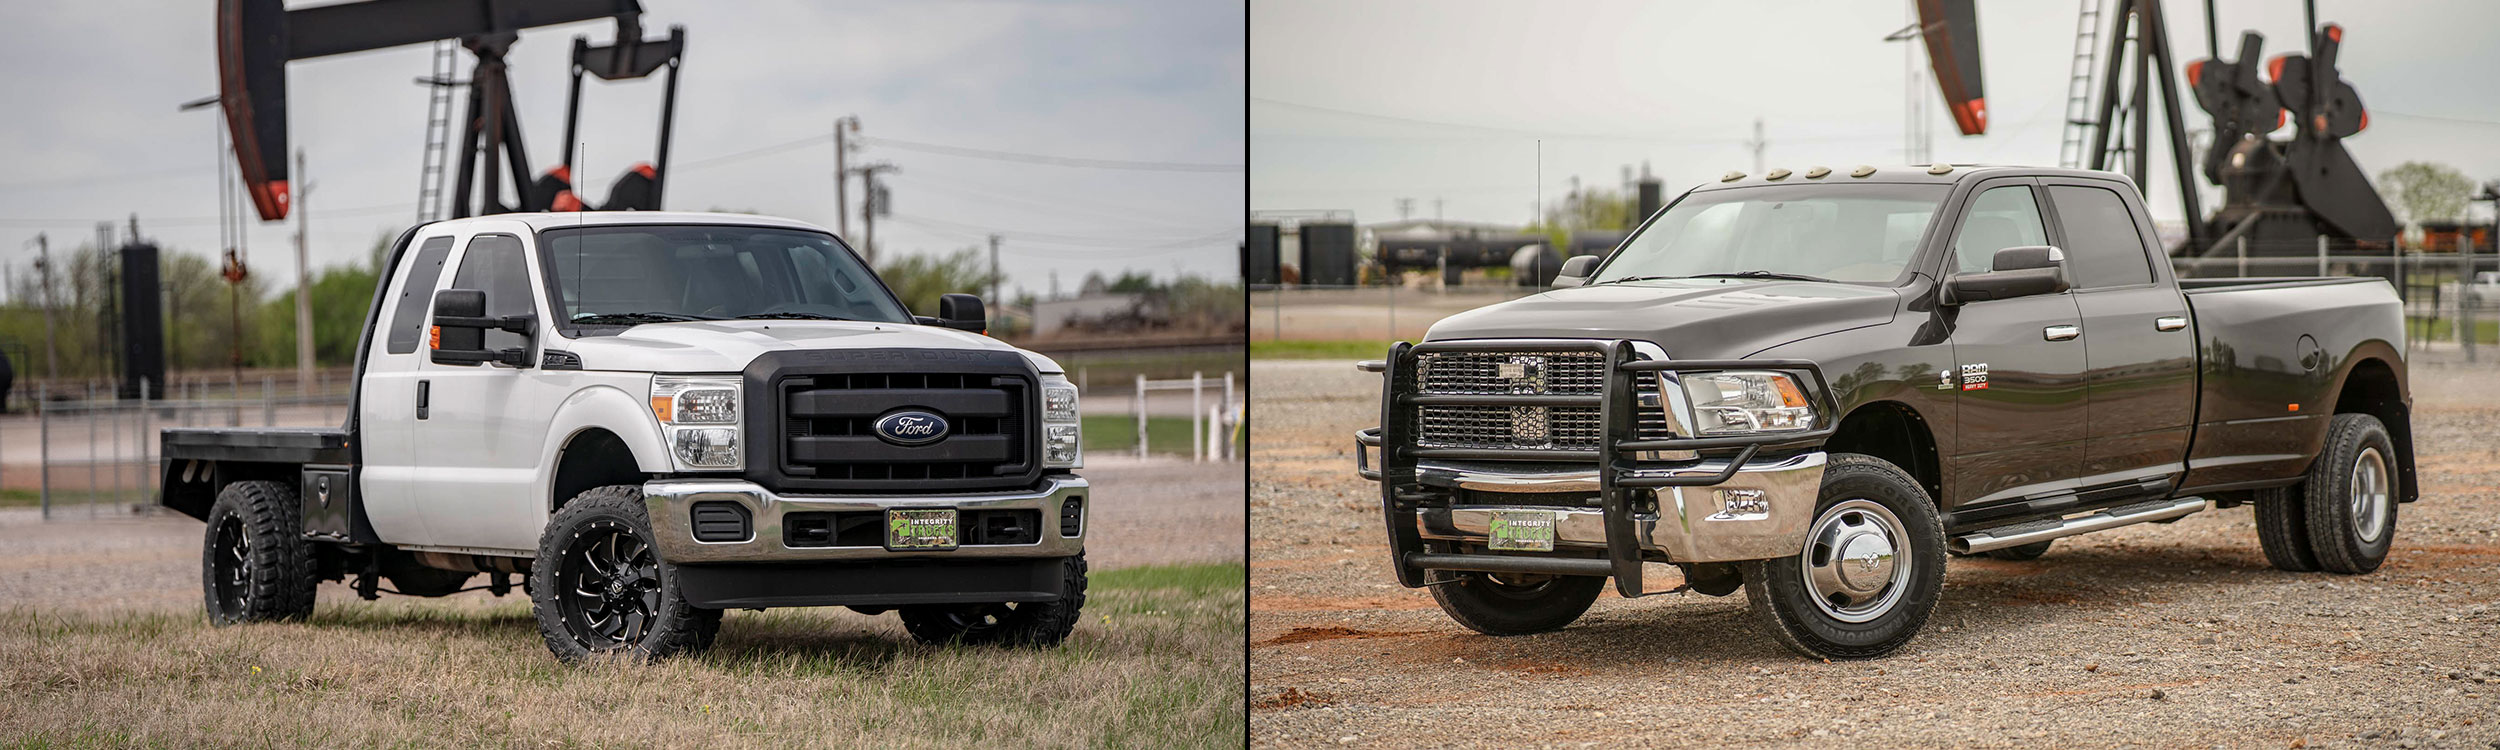 used-trucks-for-sale-permian-dodge-ford